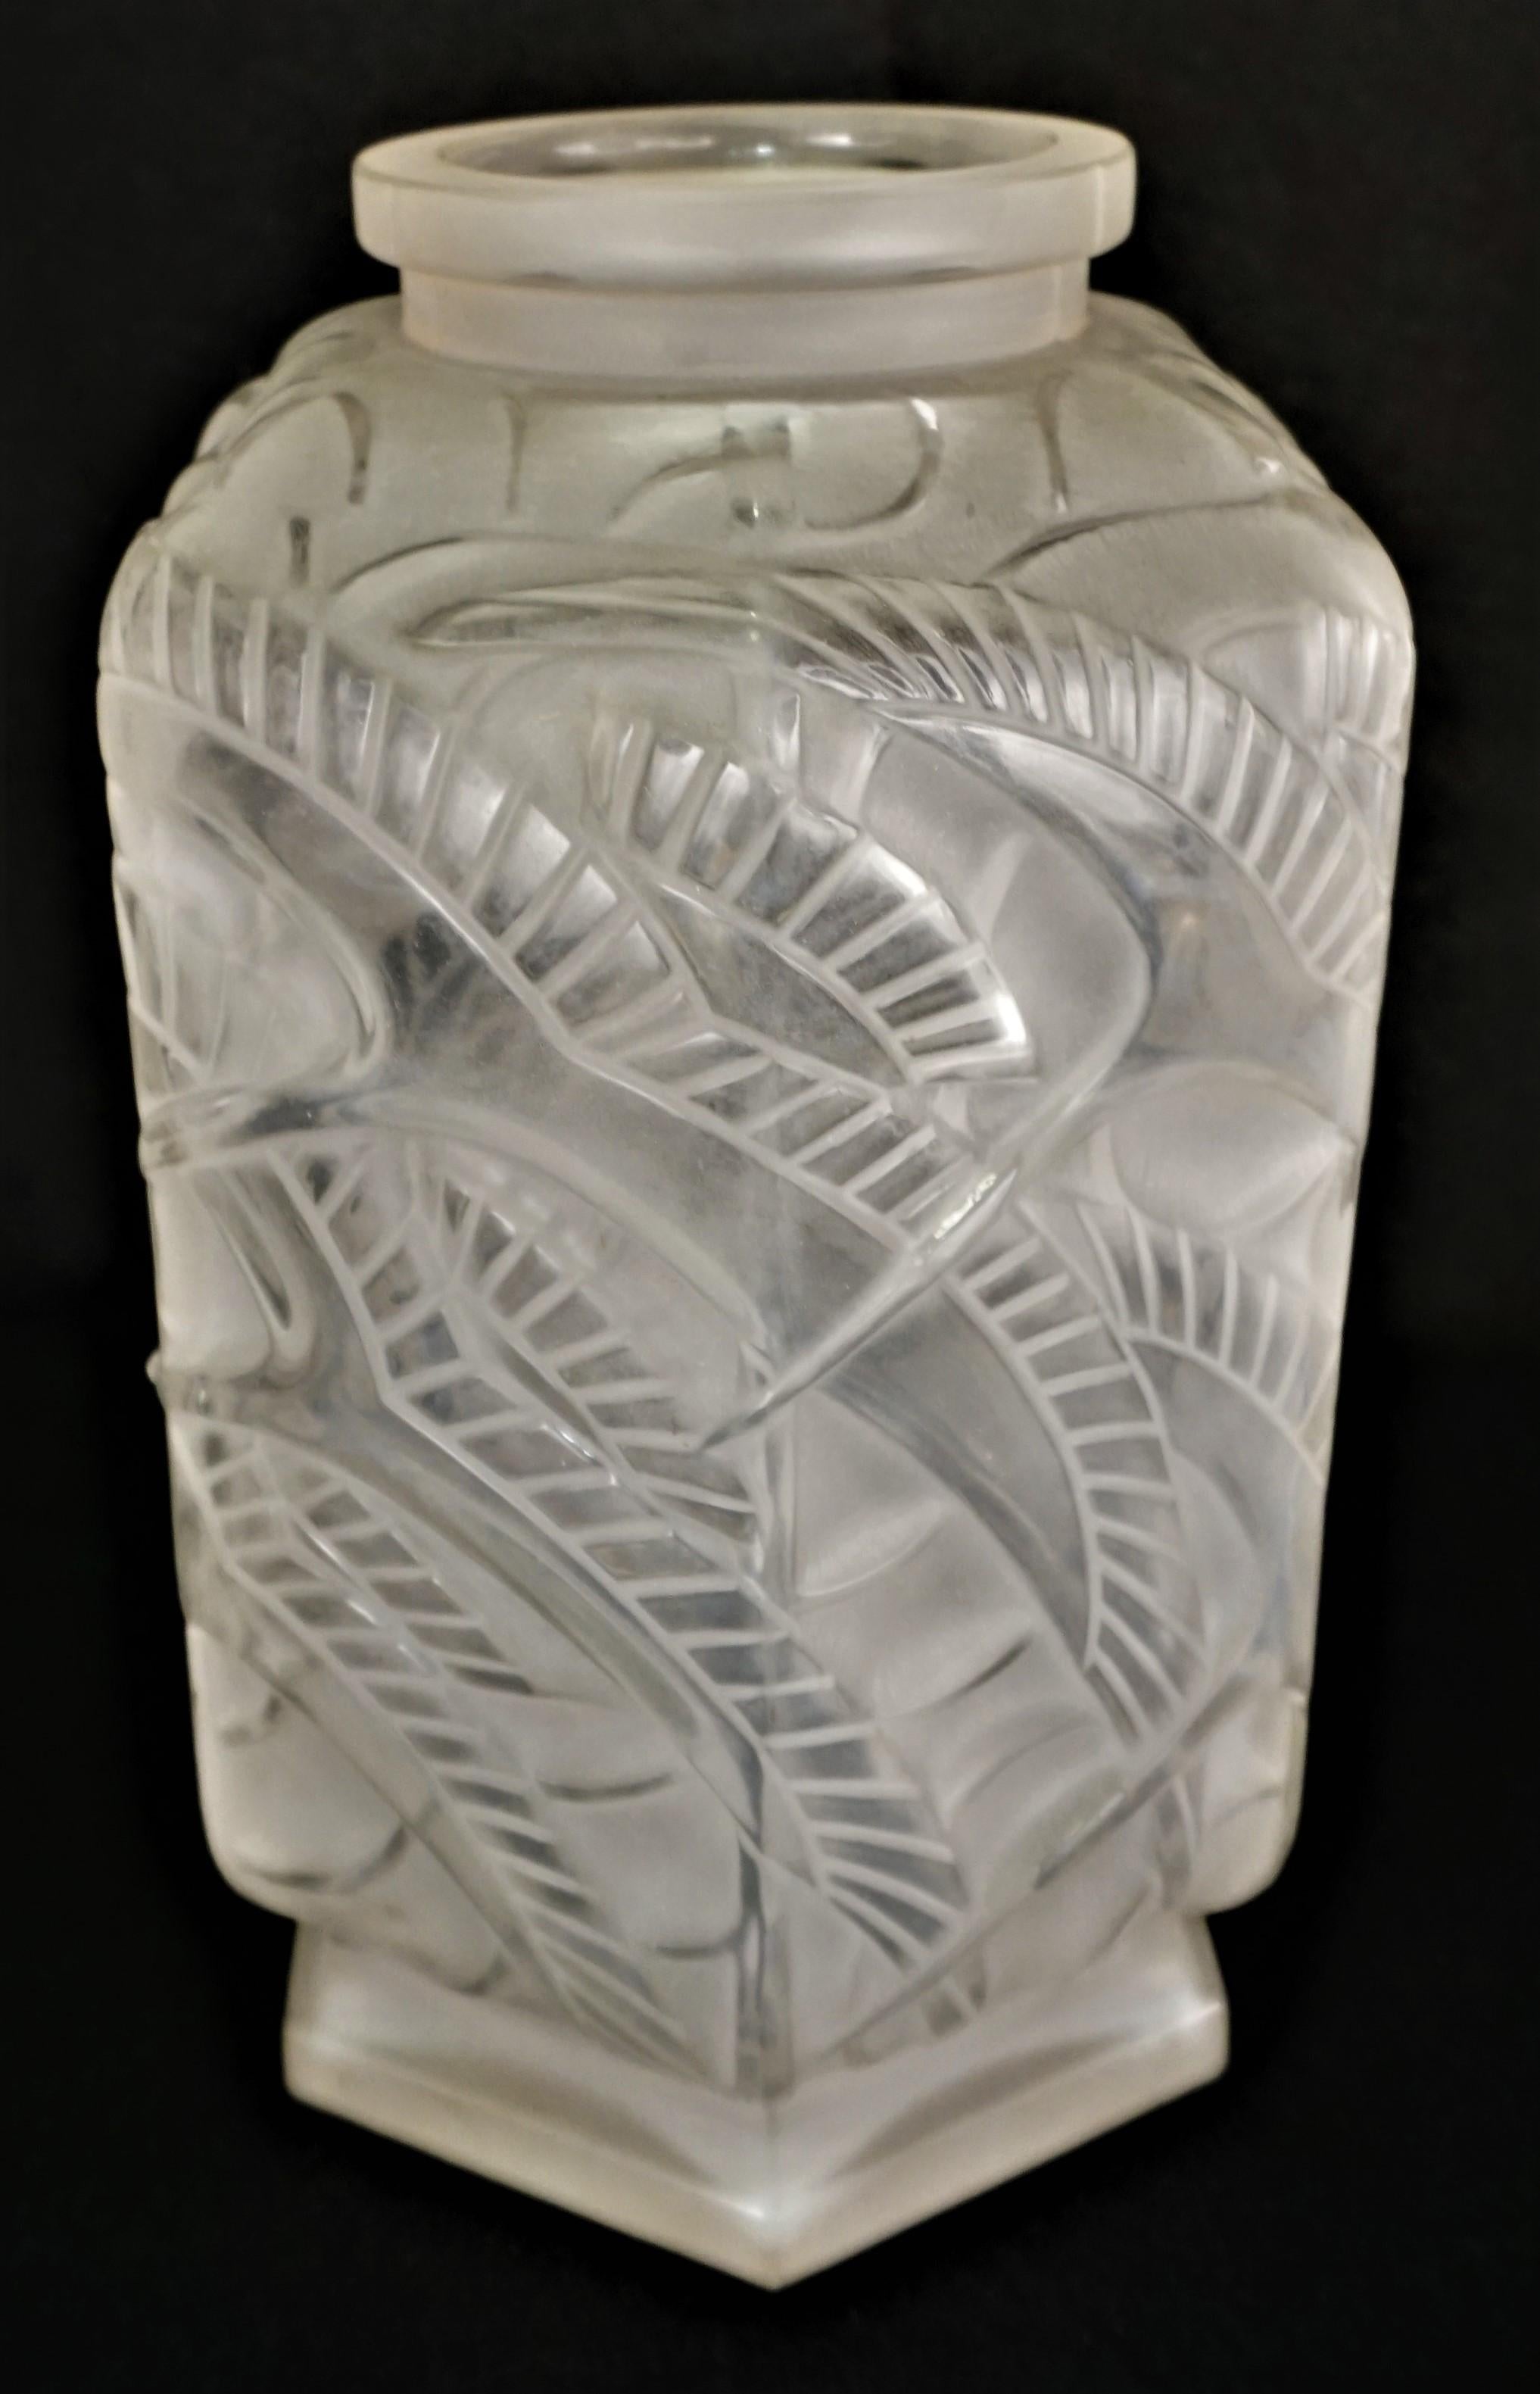 Clear frost glass vase with high light polished flying bids by Pierre D'Avesn
Pierre D'Avesn, worked for Lalique, Datum and Sevres.

 